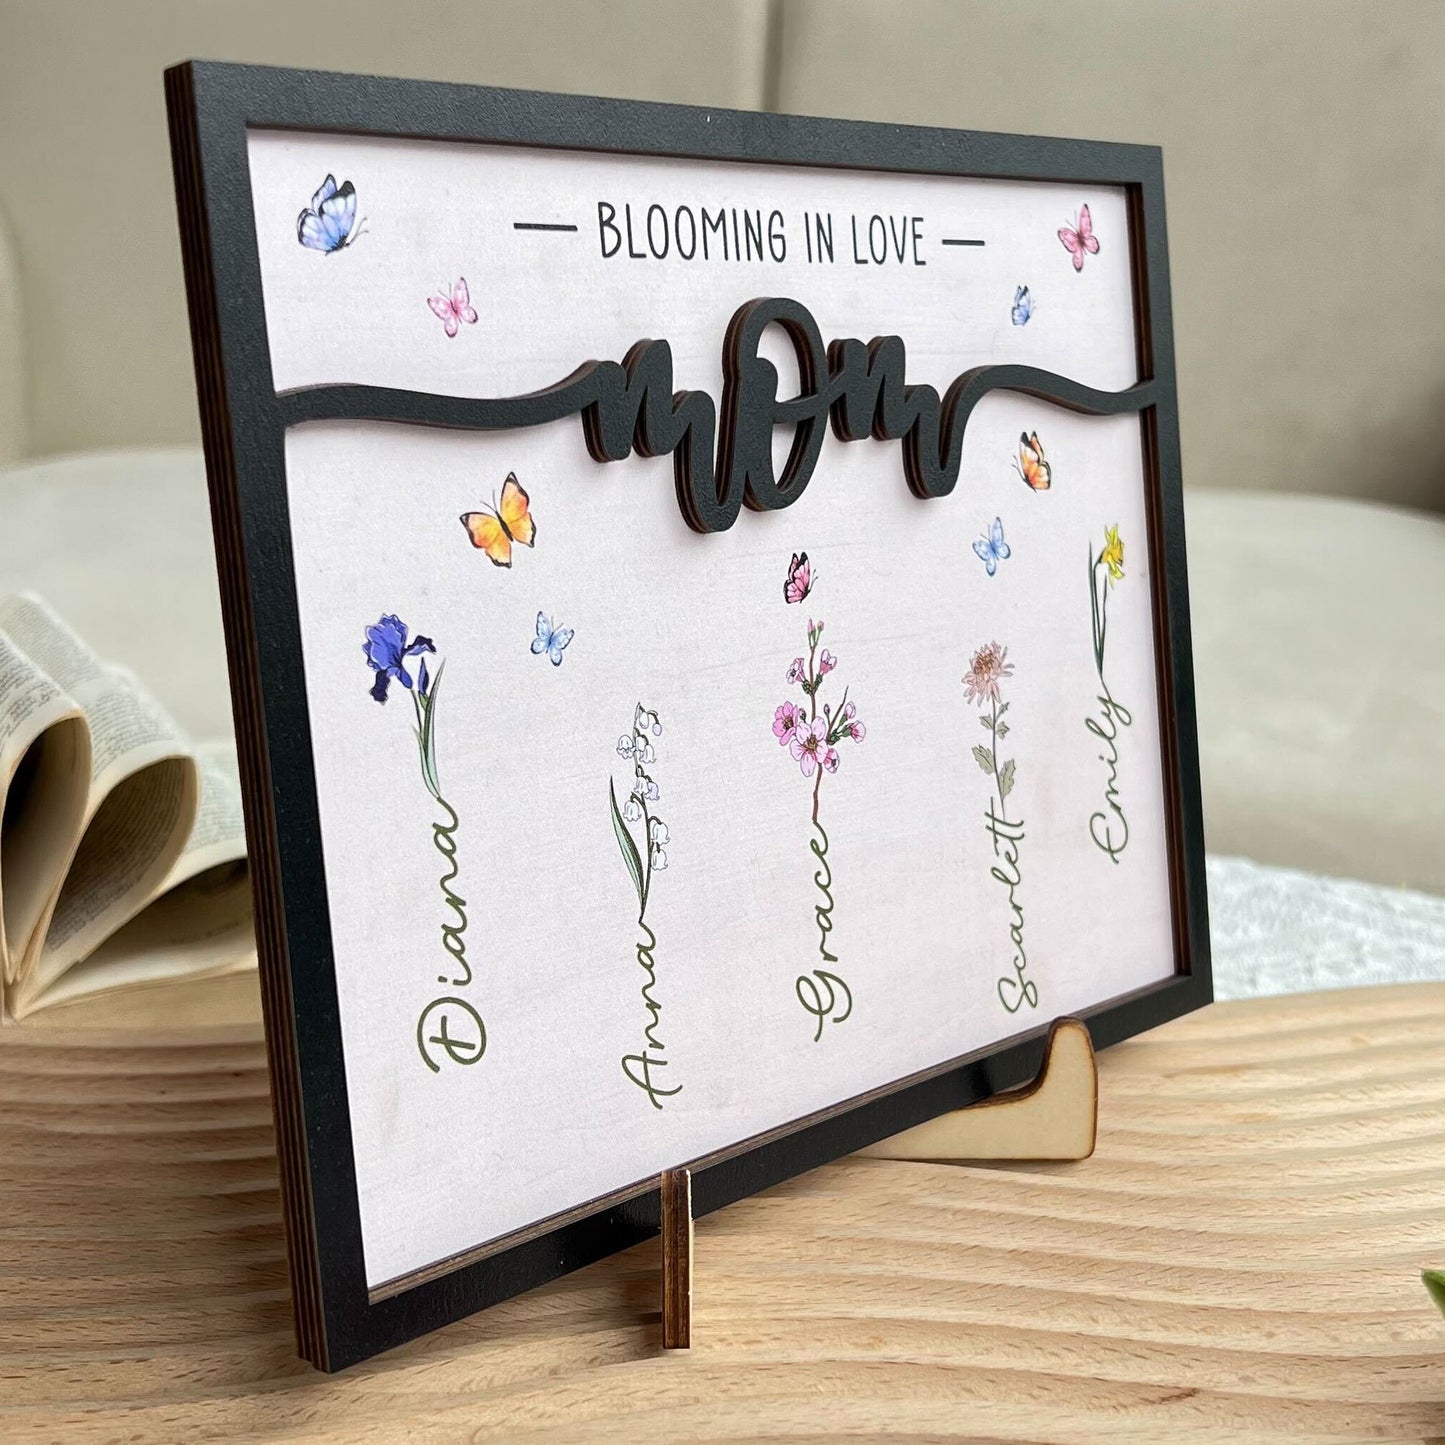 Mom Blooming In Love - Personalized Wooden Plaque